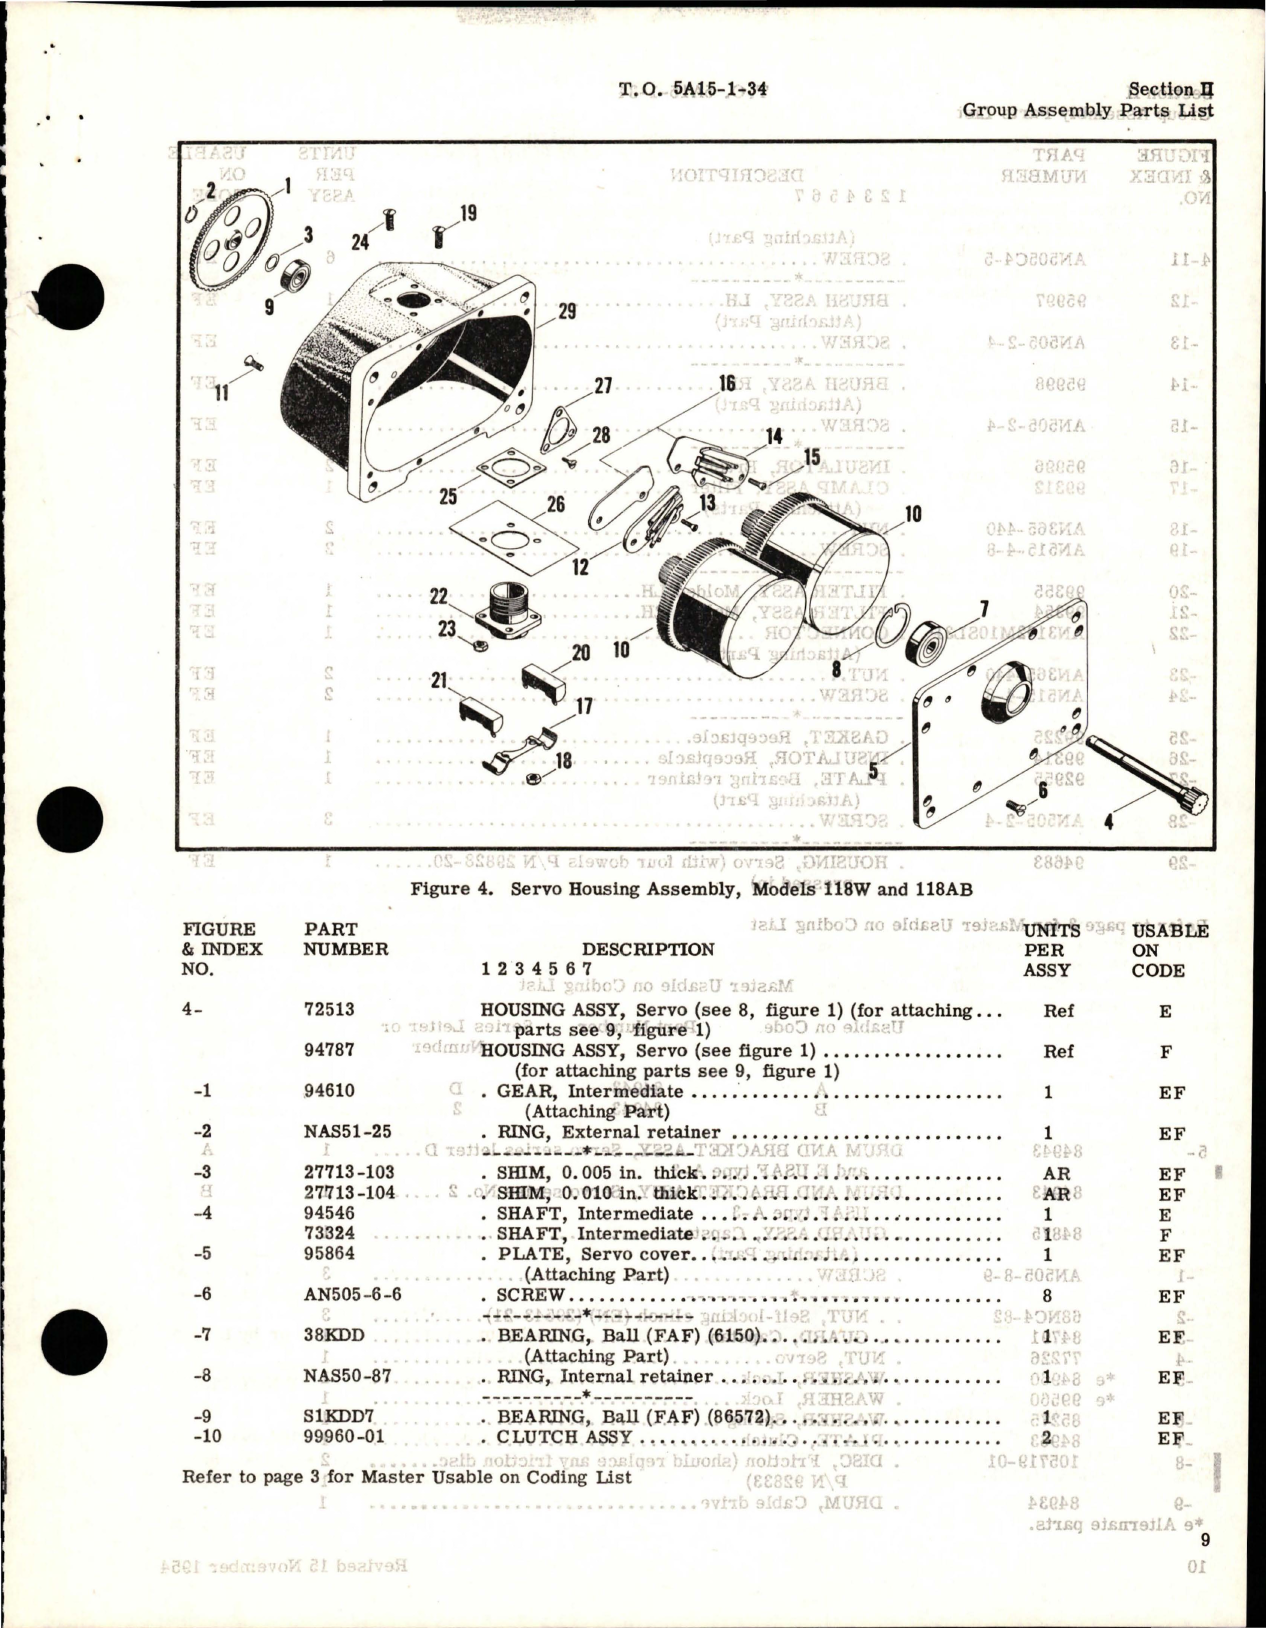 Sample page 5 from AirCorps Library document: Illustrated Parts for Servo Motor & Drive Assembly, Servo Drum and Bracket Assembly, and Follow-Up Control Assembly